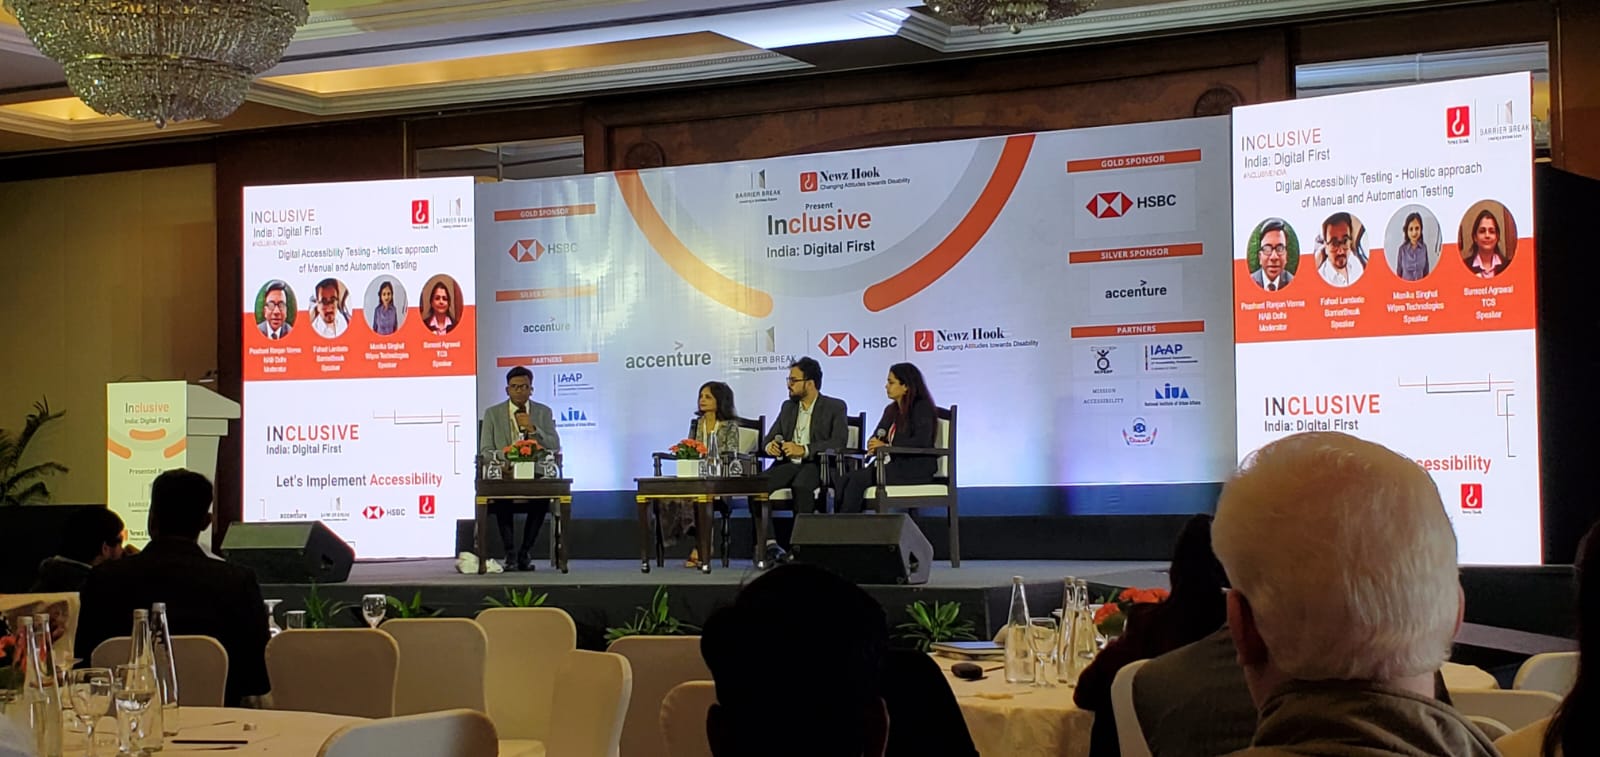 Panel Discussion On Digital Accessibility Testing, Moderated By Prashant Ranjan From Nab Delhi, Featuring Experts Fahad Lambate, Monika Singhal, And Sumeet Agrawal